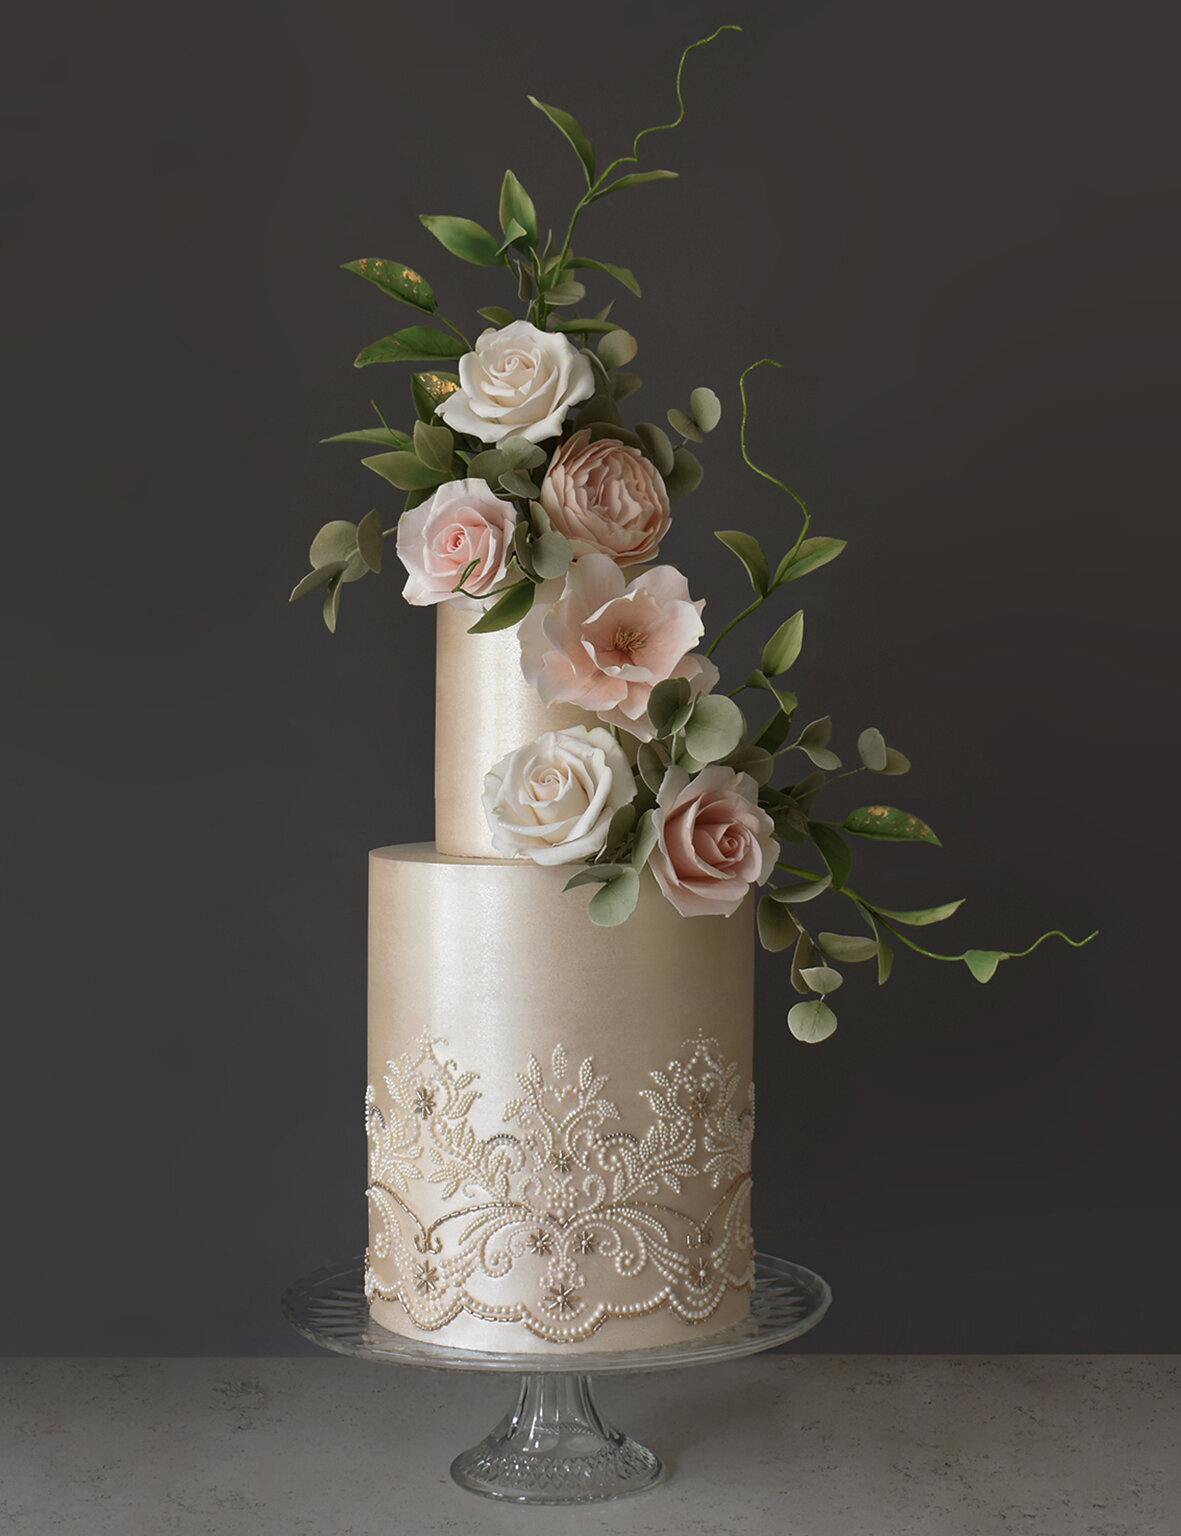 Tall two tiered wedding cake with satin finish and pale pink sugar roses and leaves